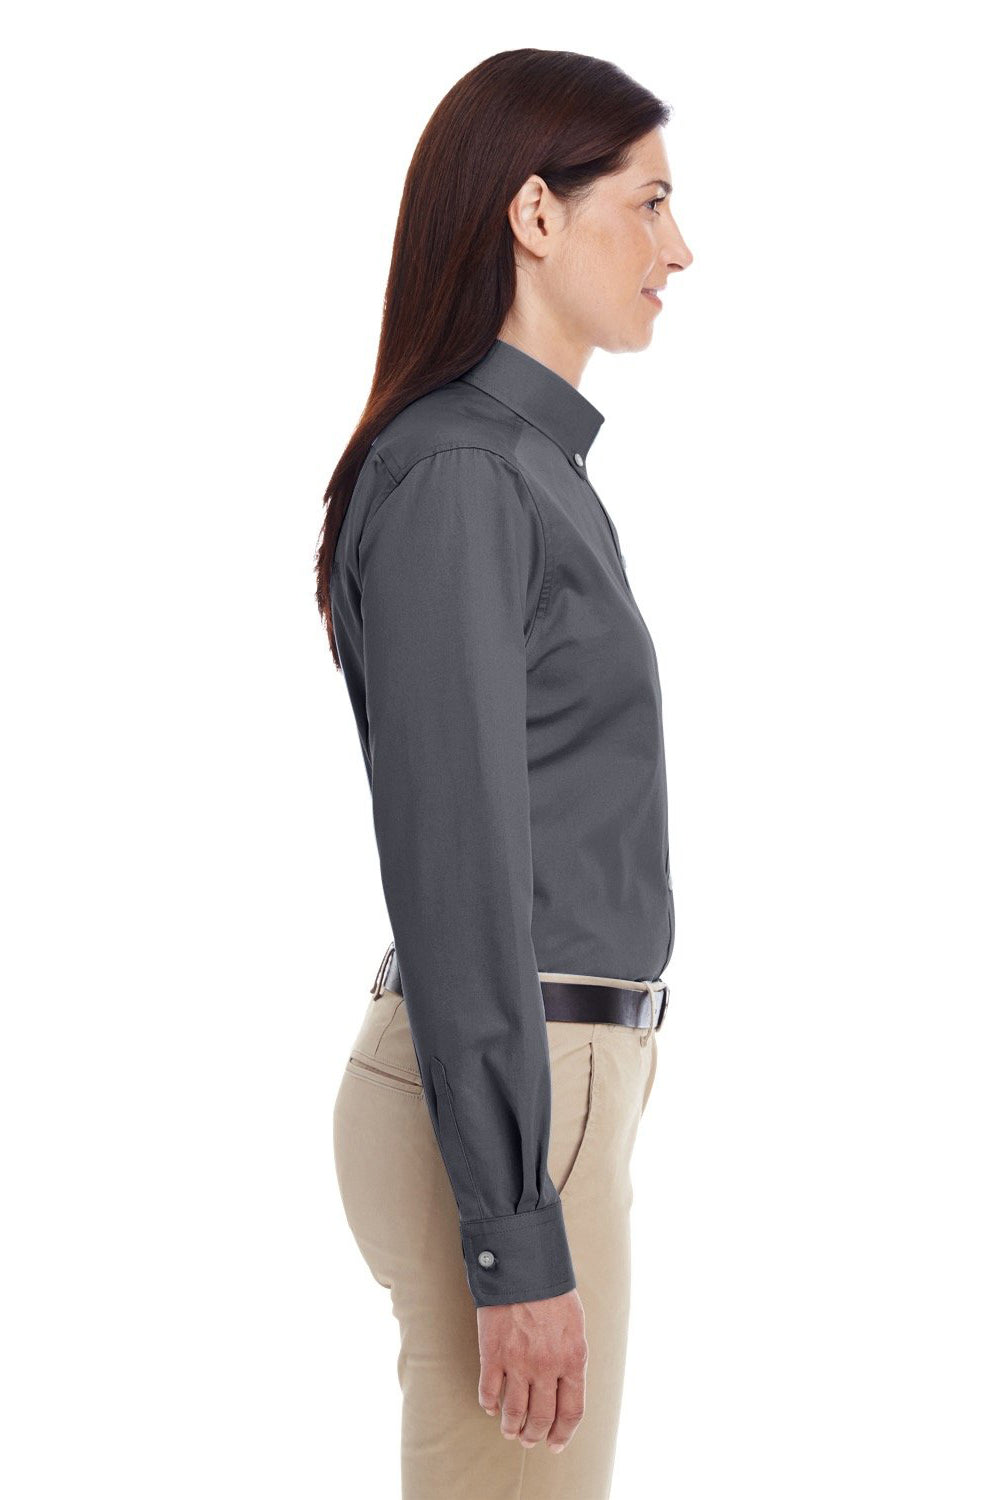 Harriton M581W Womens Foundation Stain Resistant Long Sleeve Button Down Shirt Dark Charcoal Grey SIde